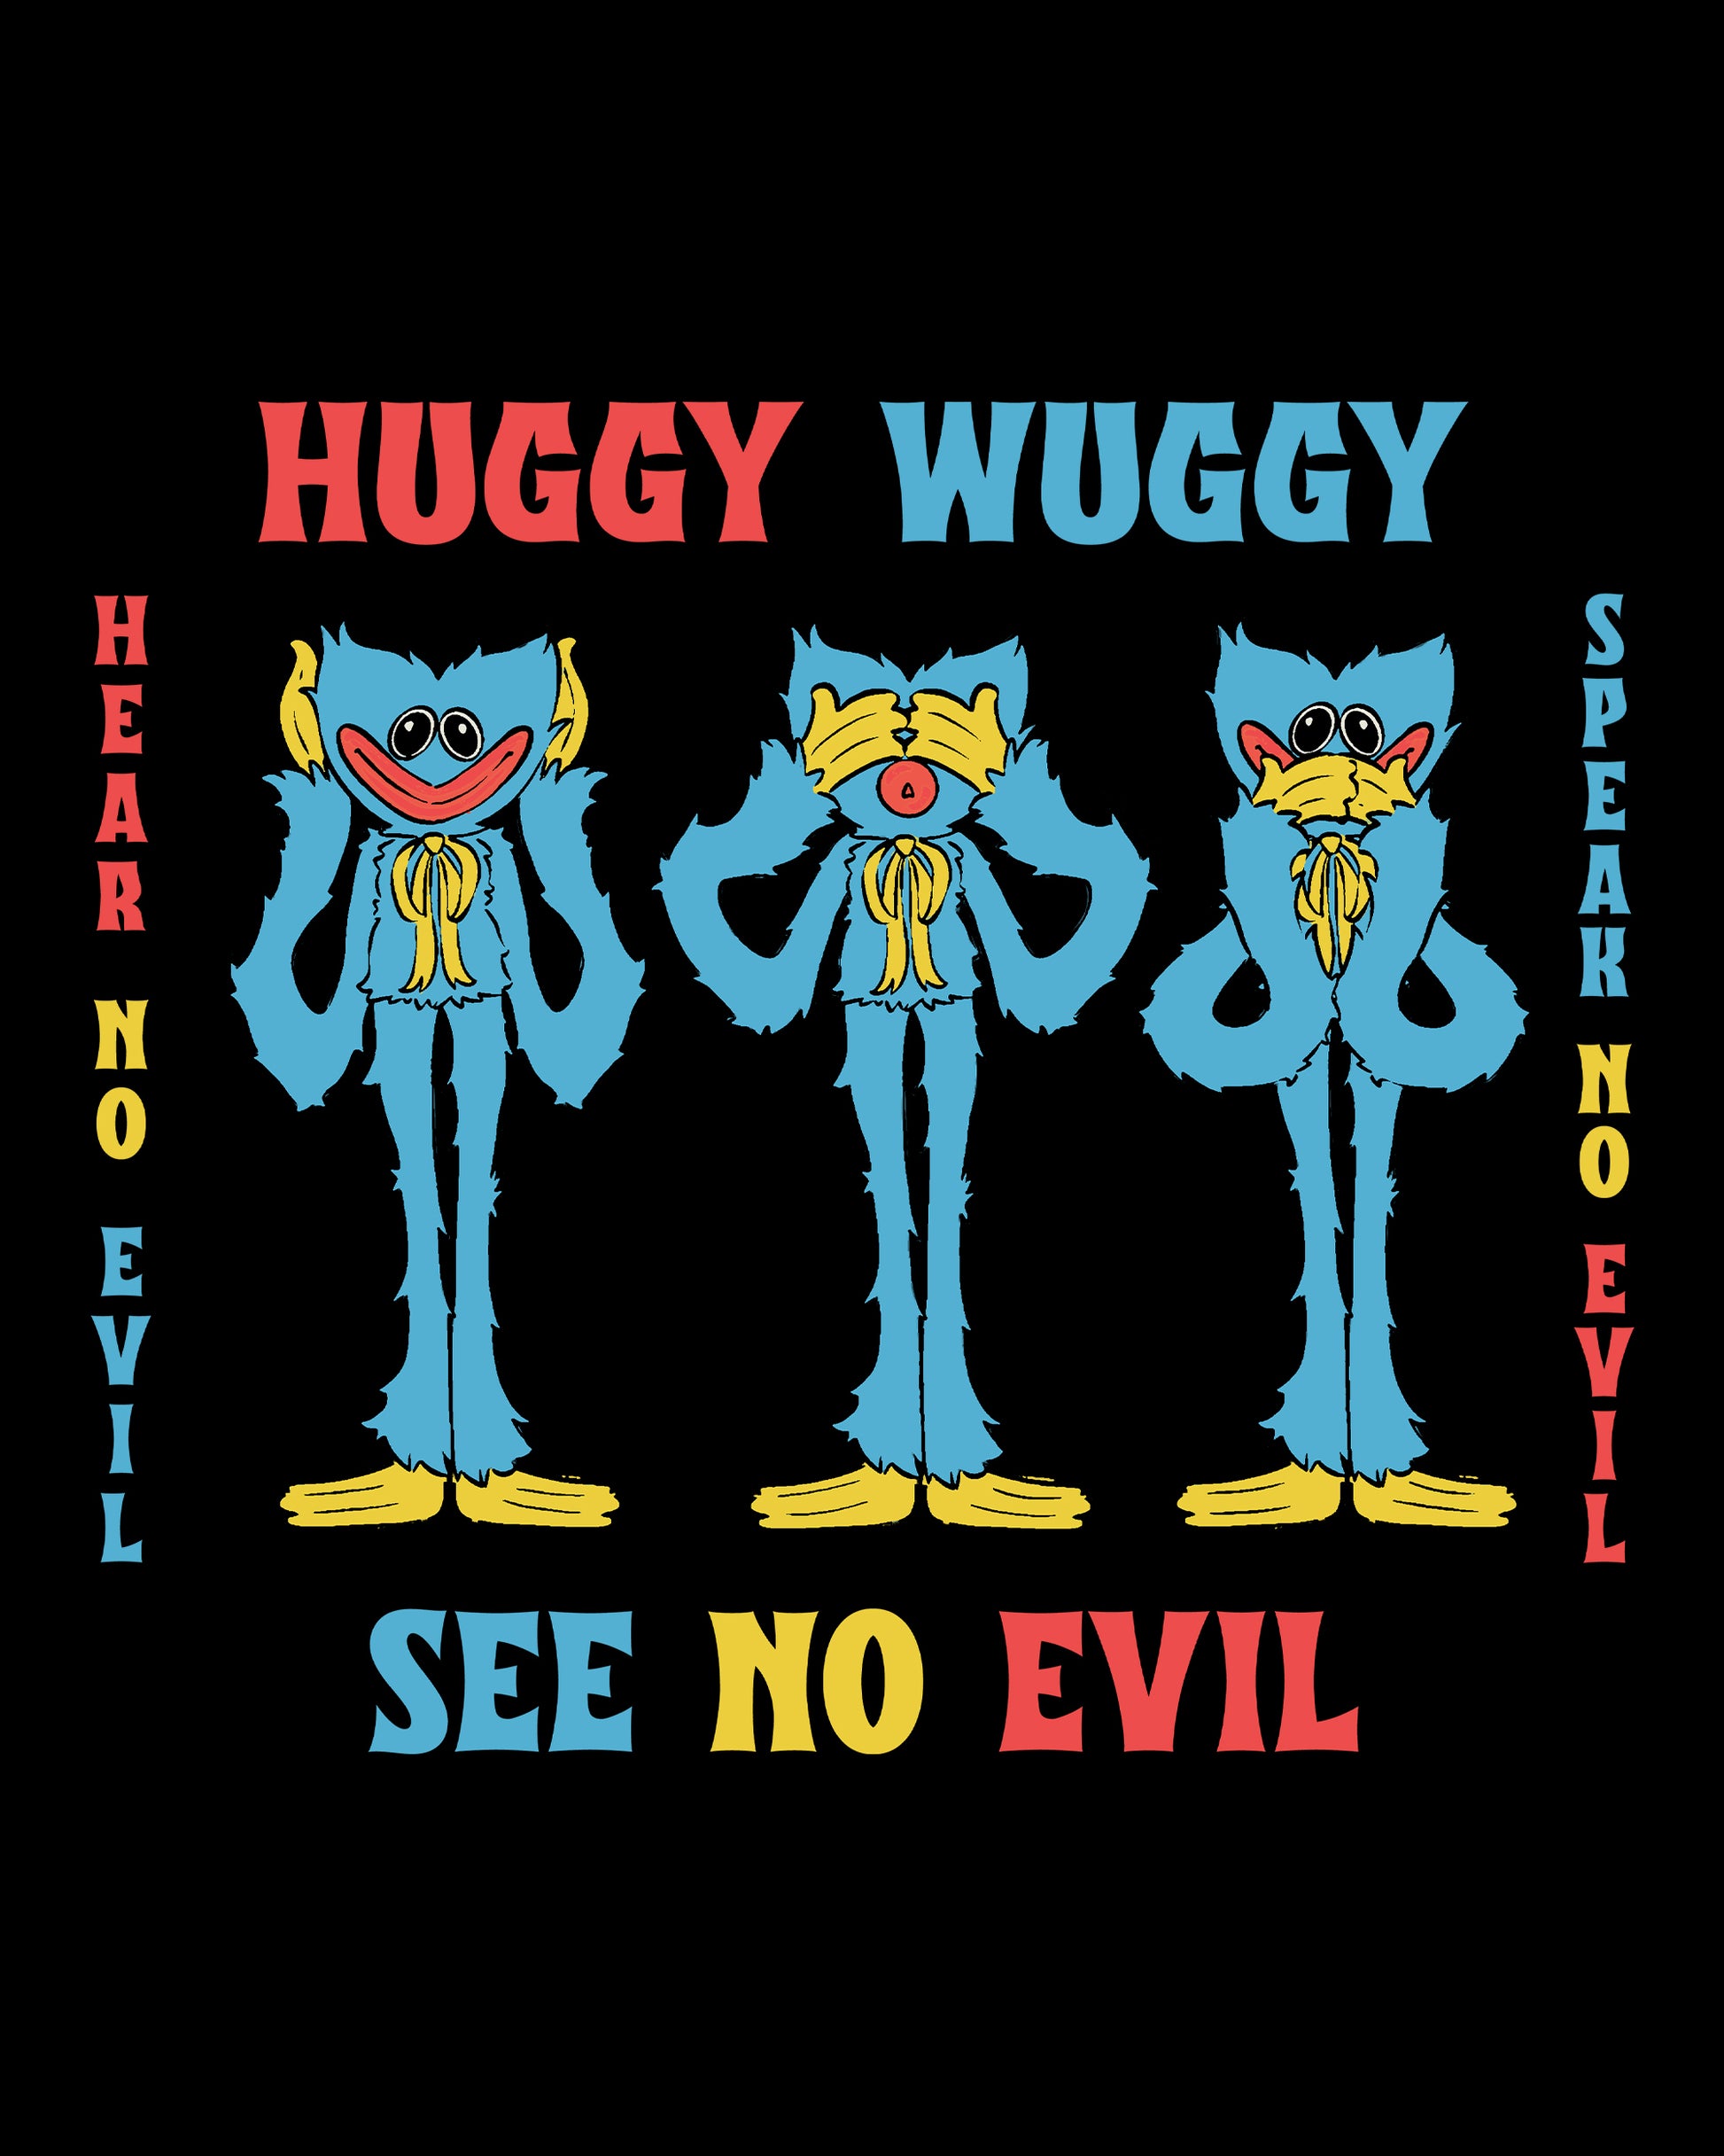 image on shirt: 3 different huggy wuggy. one with hands covering ears. one with hands covering eyes. one with hands covering mouth. text: huggy wuggy hear no evil see no evil speak no evil.